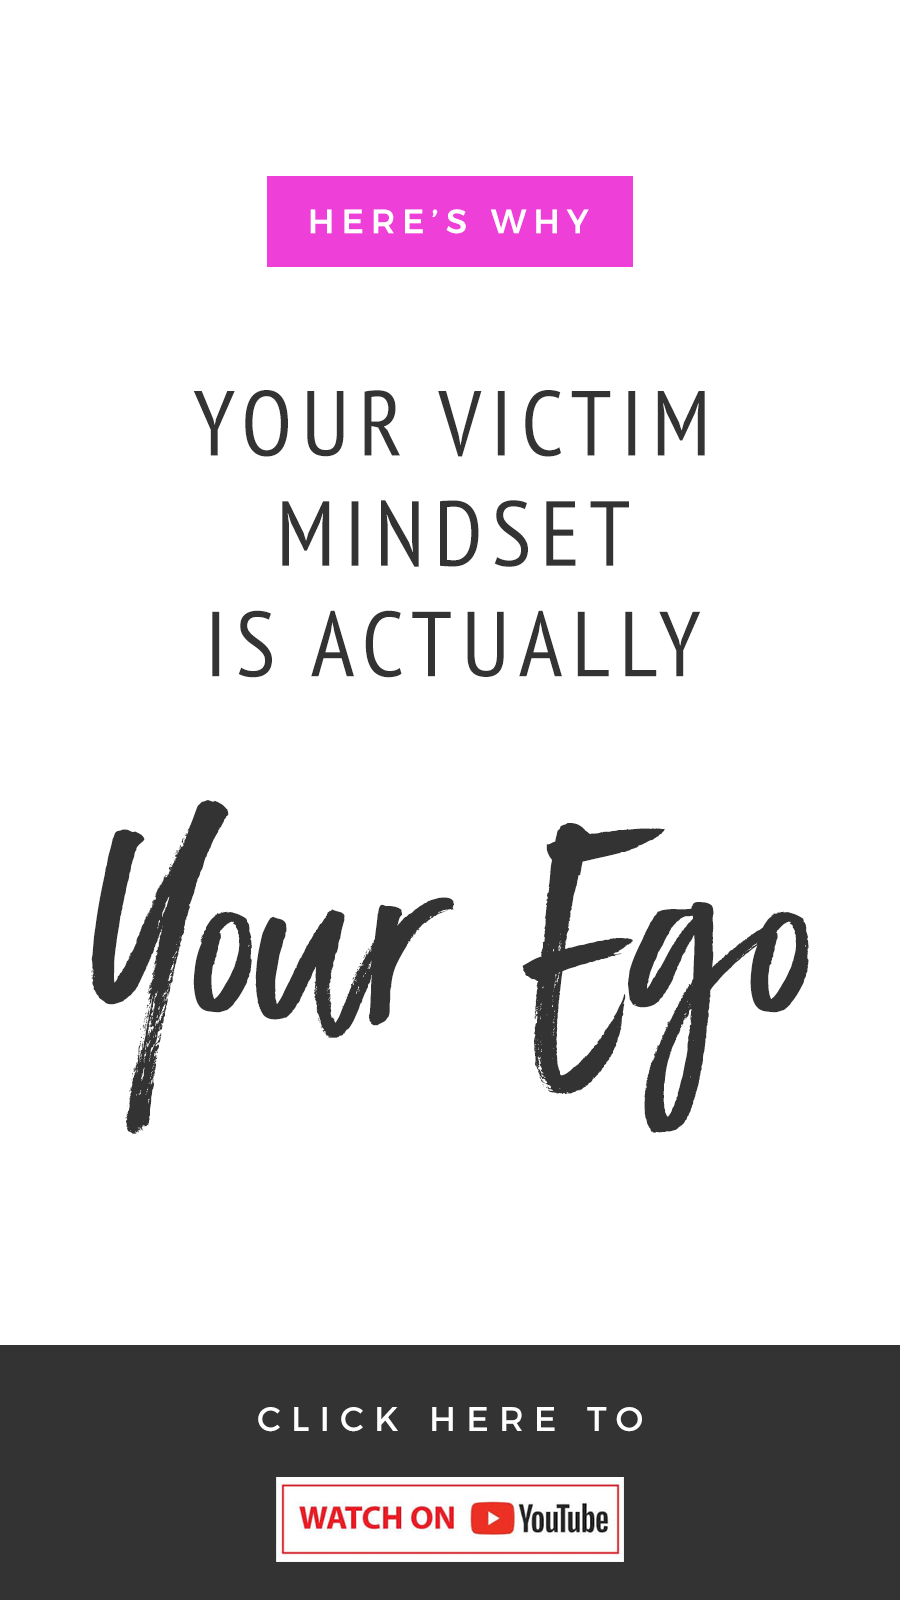 Why Your Victim Mindset Is Actually Your Ego!